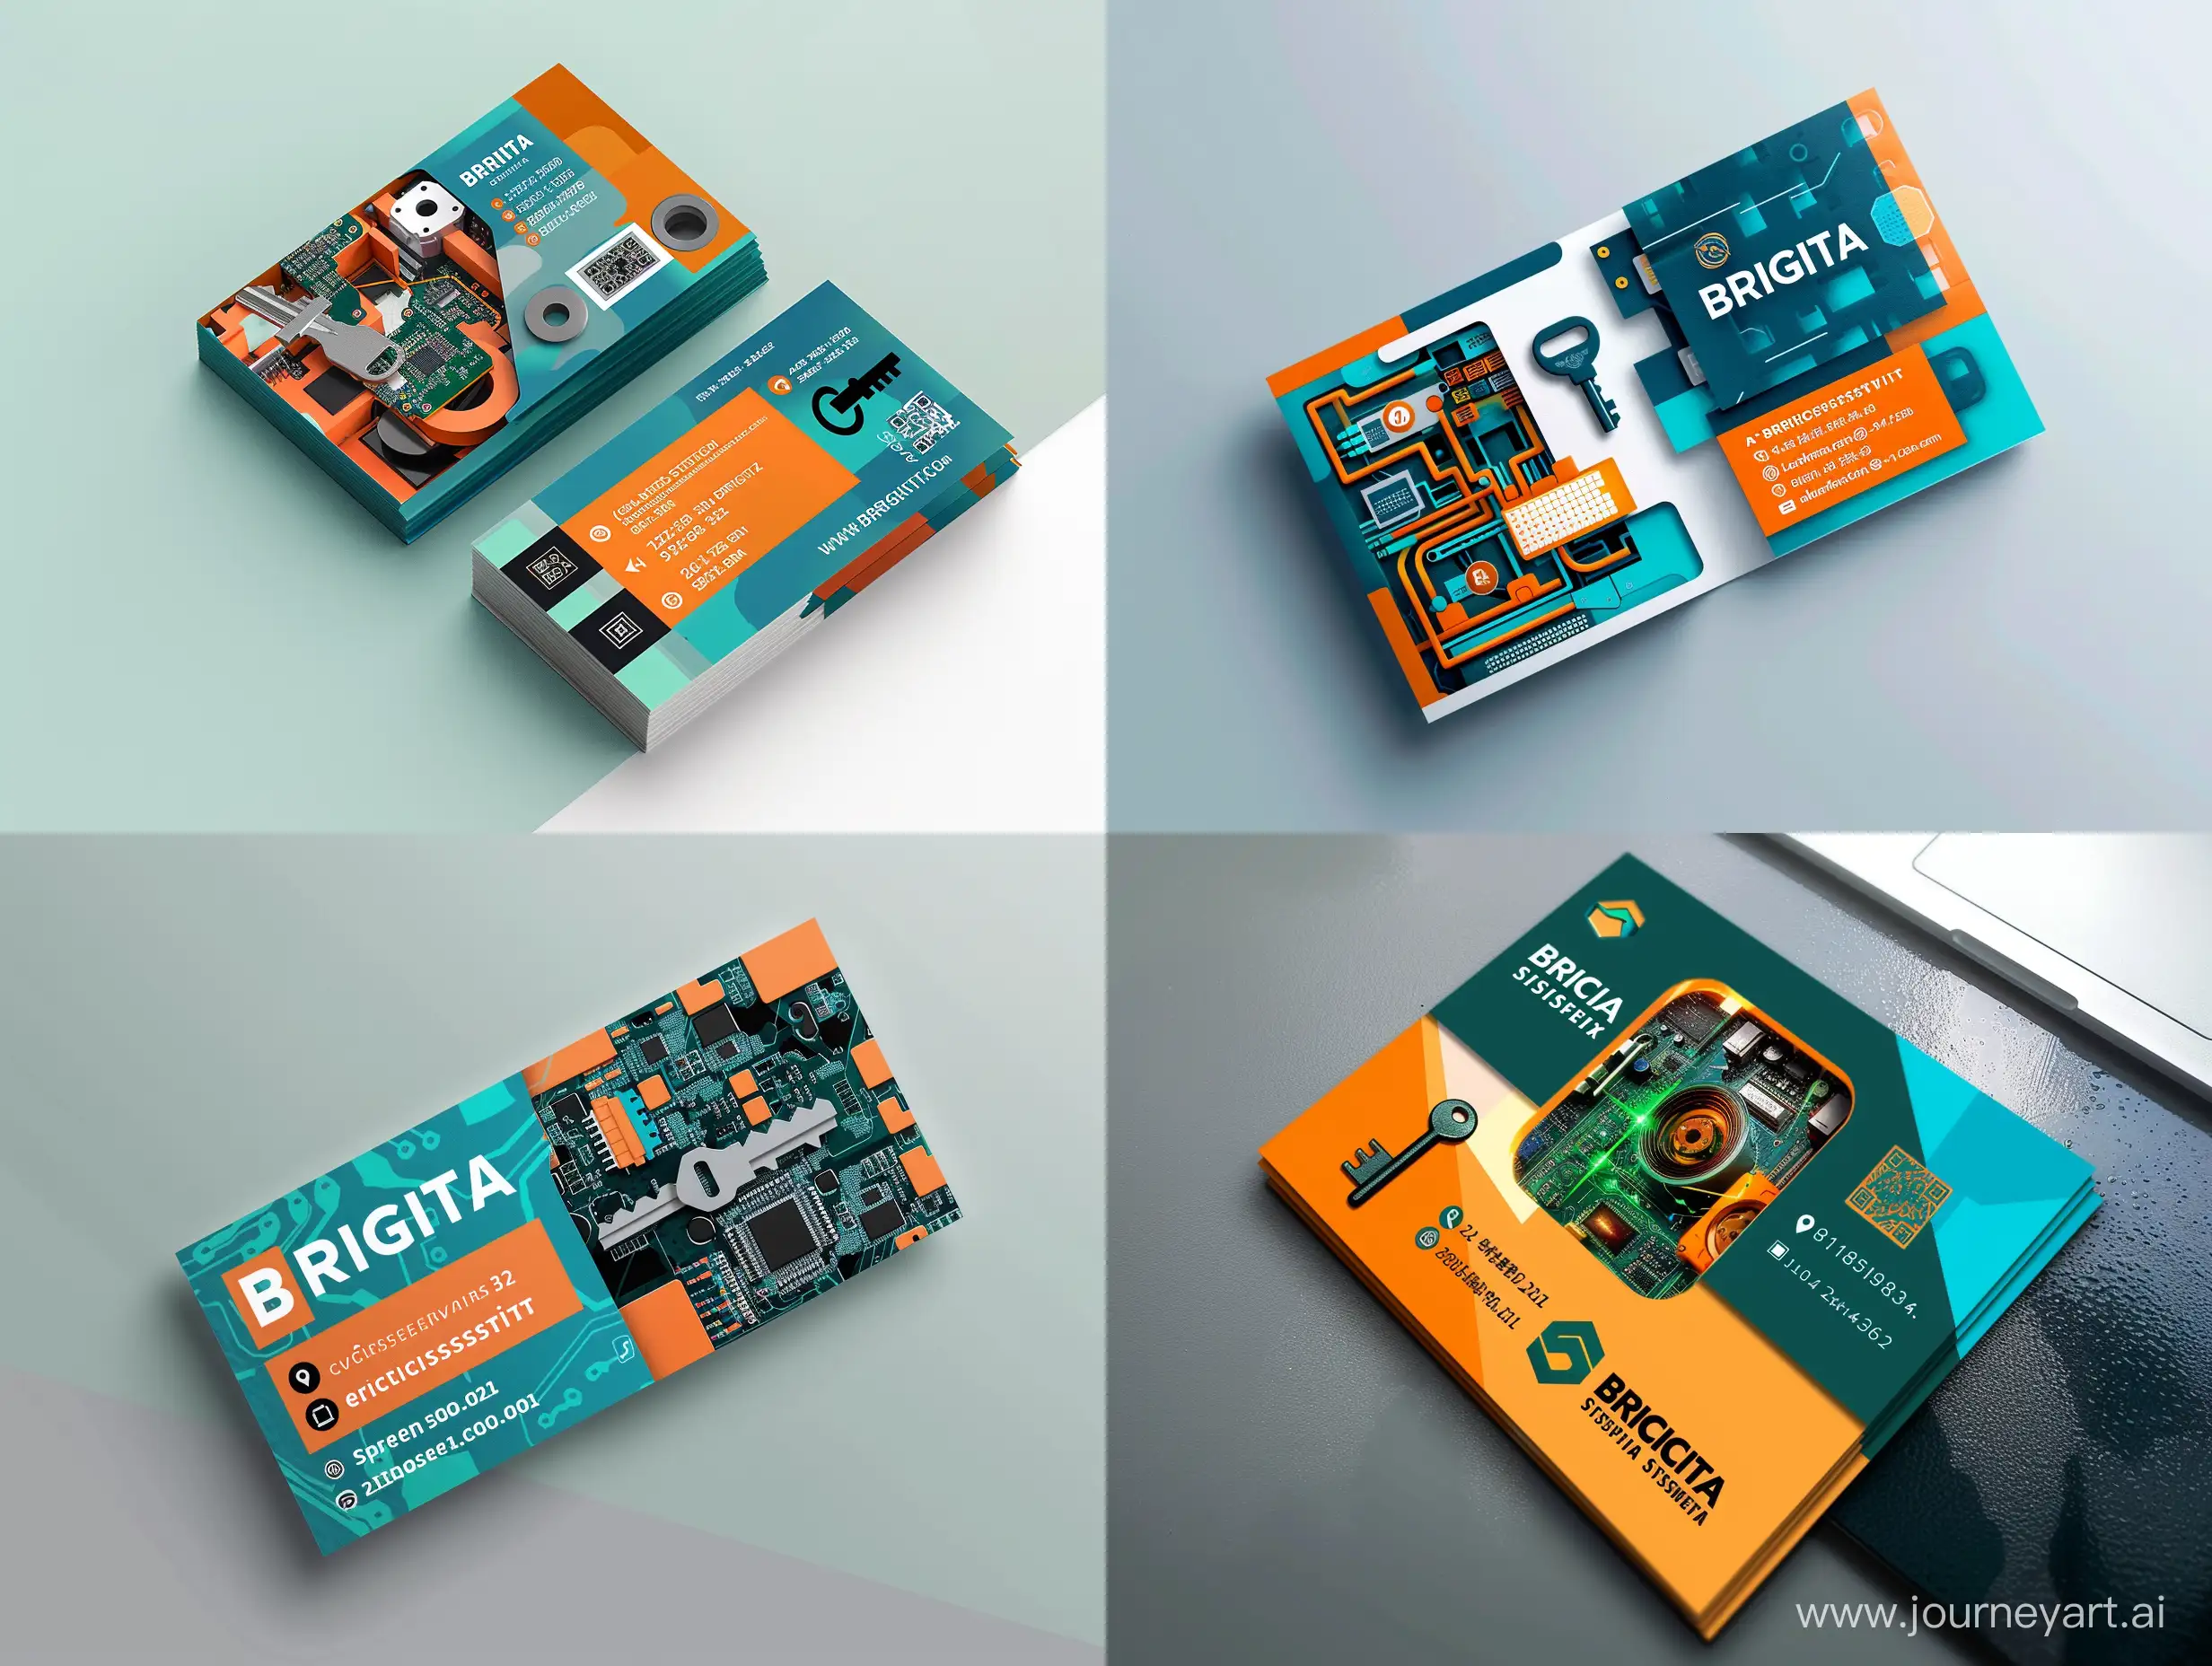 Come up with a design of a business card  for the Cybersecurity Systems Engine of the company name BRIGITA. Computer parts or security key should be visible inside. The company provides information technology  and Cybersecurity services. The corporate colors are orange, blue and light green. 